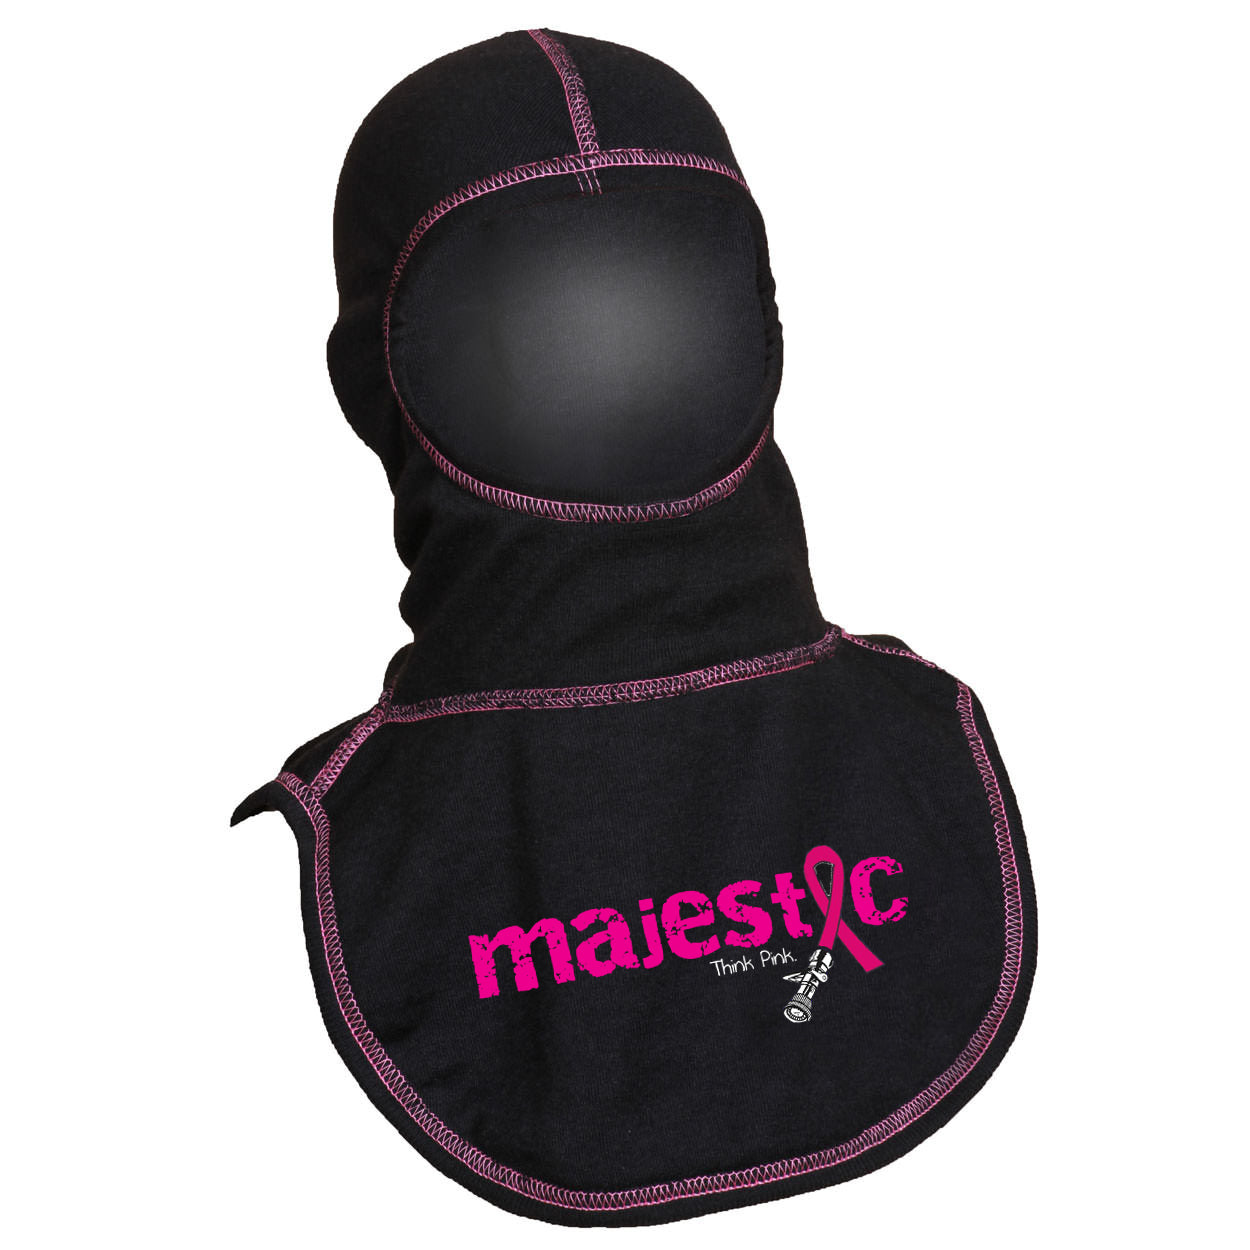 Majestic Apparel PAC II Specialty Hood Breast Cancer Awareness